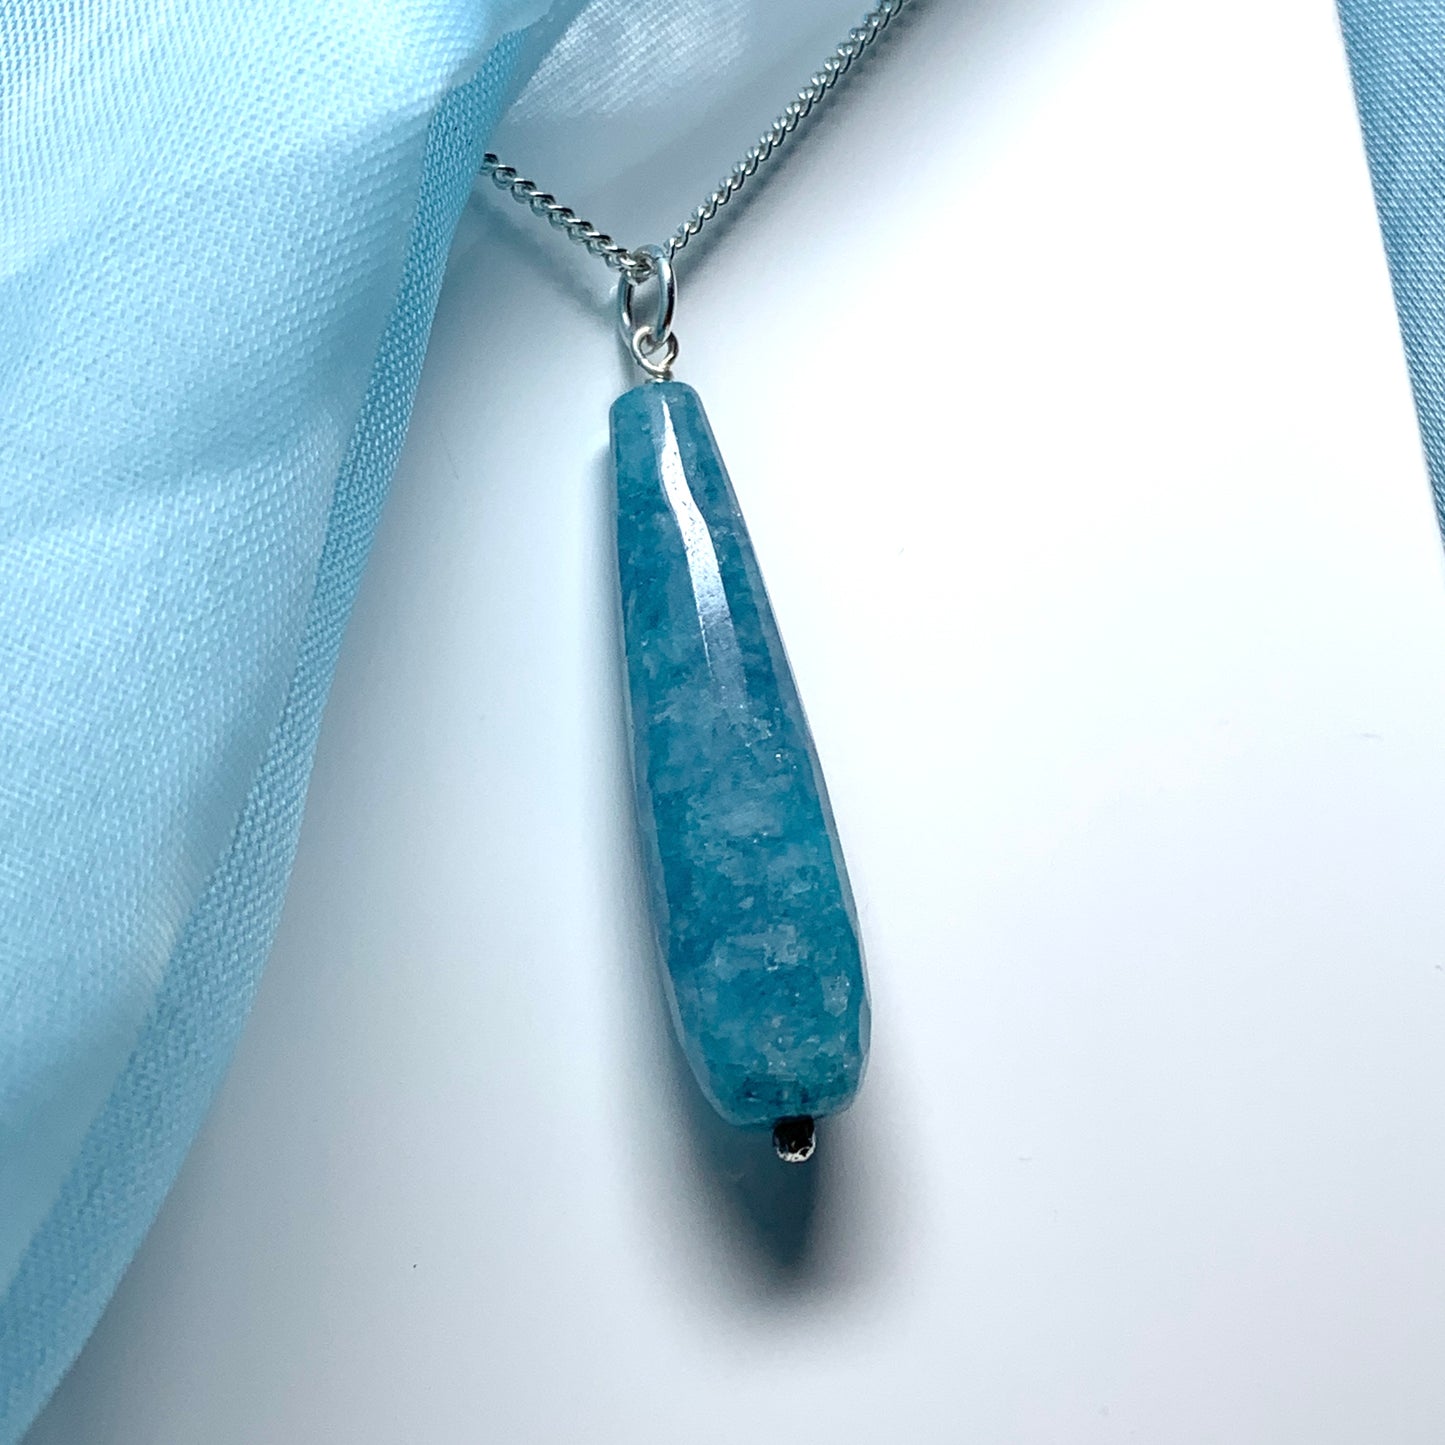 Light blue agate shaped teardrop necklace pendent sterling silver